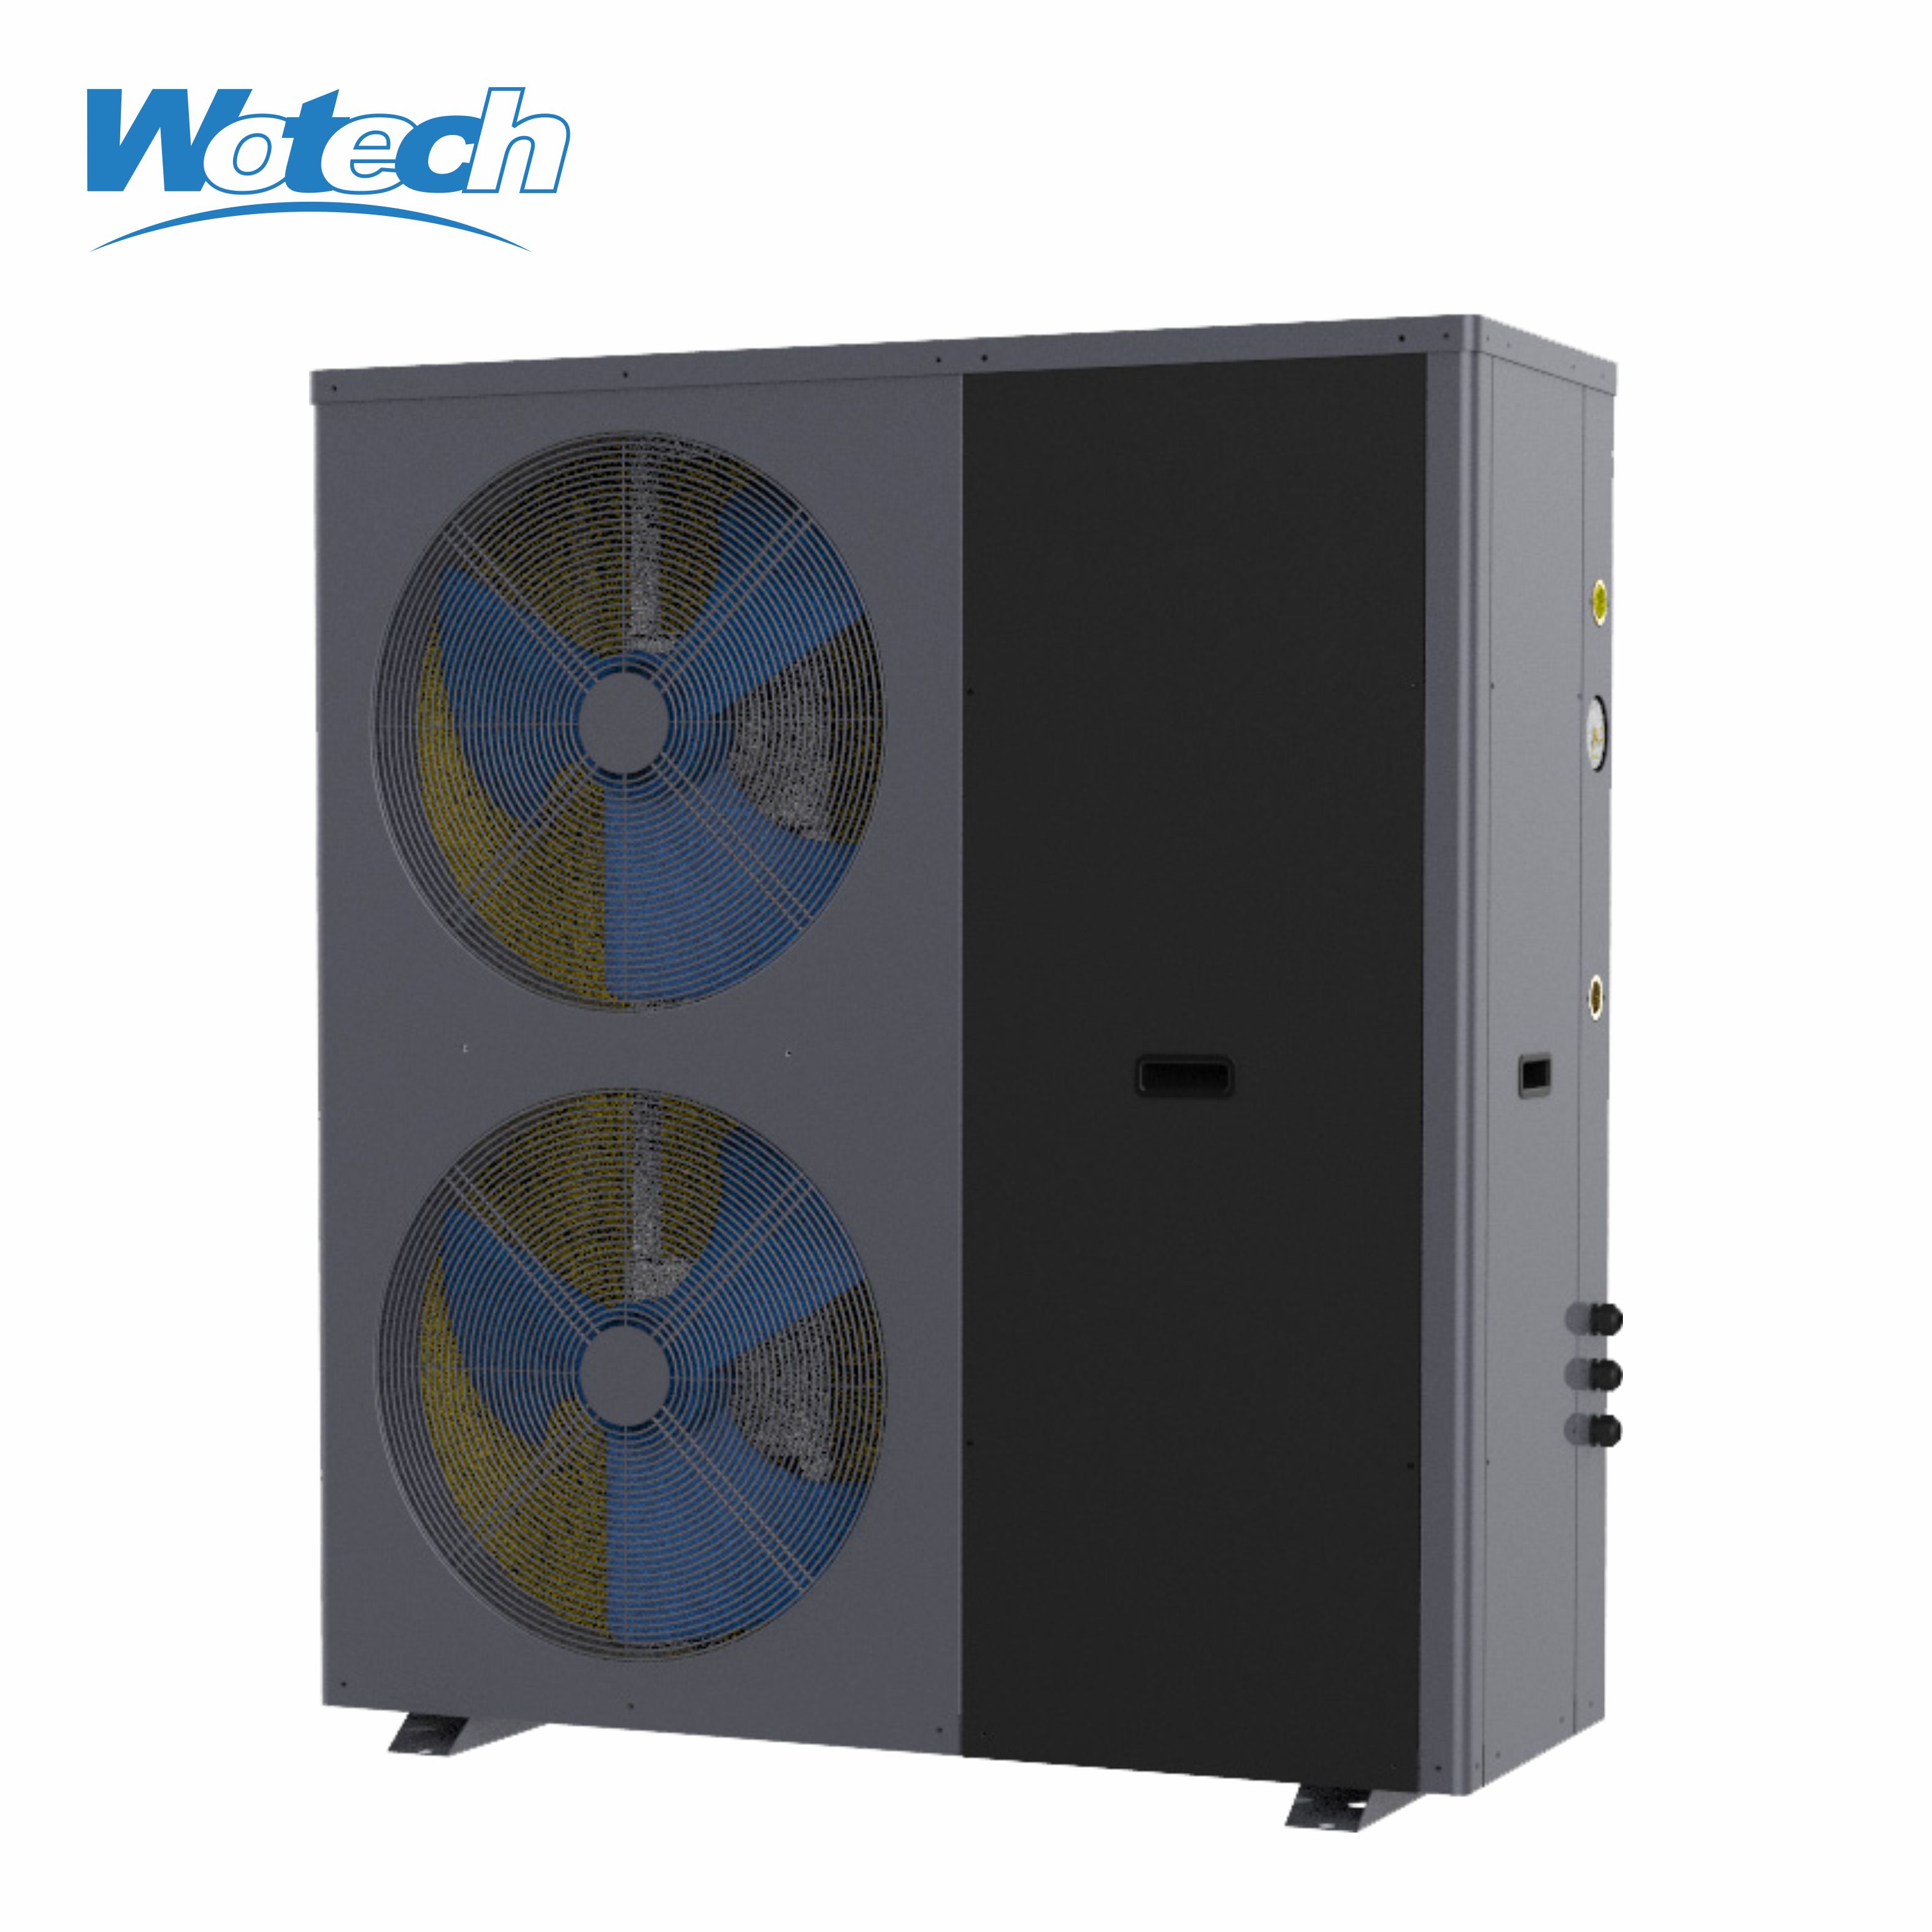 R32 High Efficiency Fixed output Air Source Heat Pump with Wifi Function